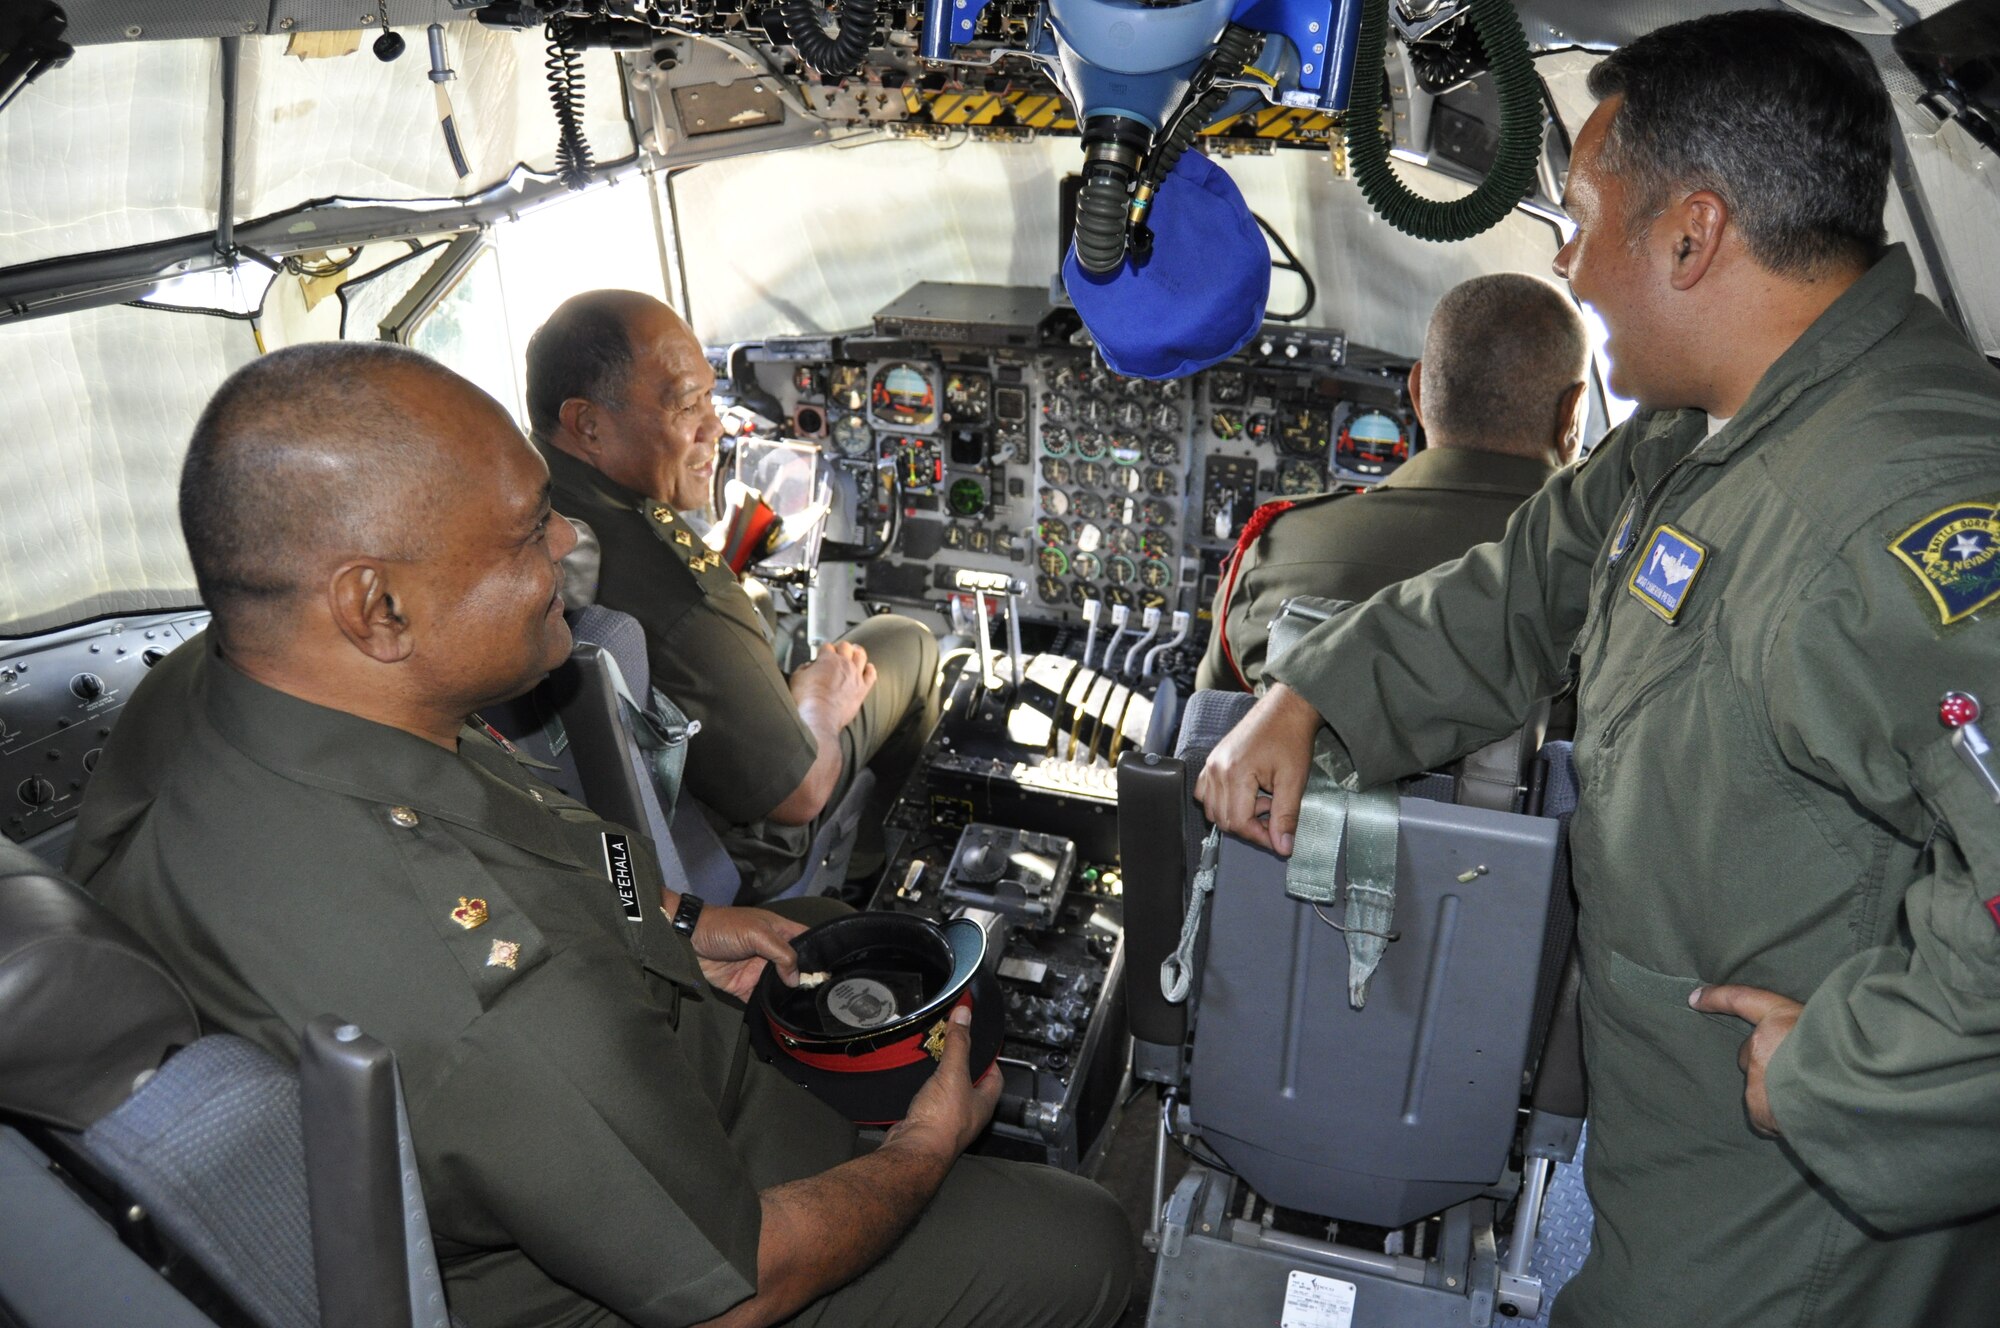 The 152nd Airlift Wing opened its doors to Brig. Gen. 'Uta'atu, Lt. Col. Lord Ve'ehala, and Senior Warrant Officer Kava of the Kingdom of Tonga’s military on August 20. Master Sgt. Cameron Pieters talks about the capabilities of the C-130 on the flight deck of the aircraft. From left to right: Lt. Col. Lord Ve'ehala, Brig. Gen. 'Uta'atu, Senior Warrant Officer Kava, and 192nd Airlift Squadron Flight Engineer, Master Sgt. Cameron Pieters. (Photo by Master Sgt. Paula Macomber, 152nd Airlift Wing Public Affairs/RELEASED)